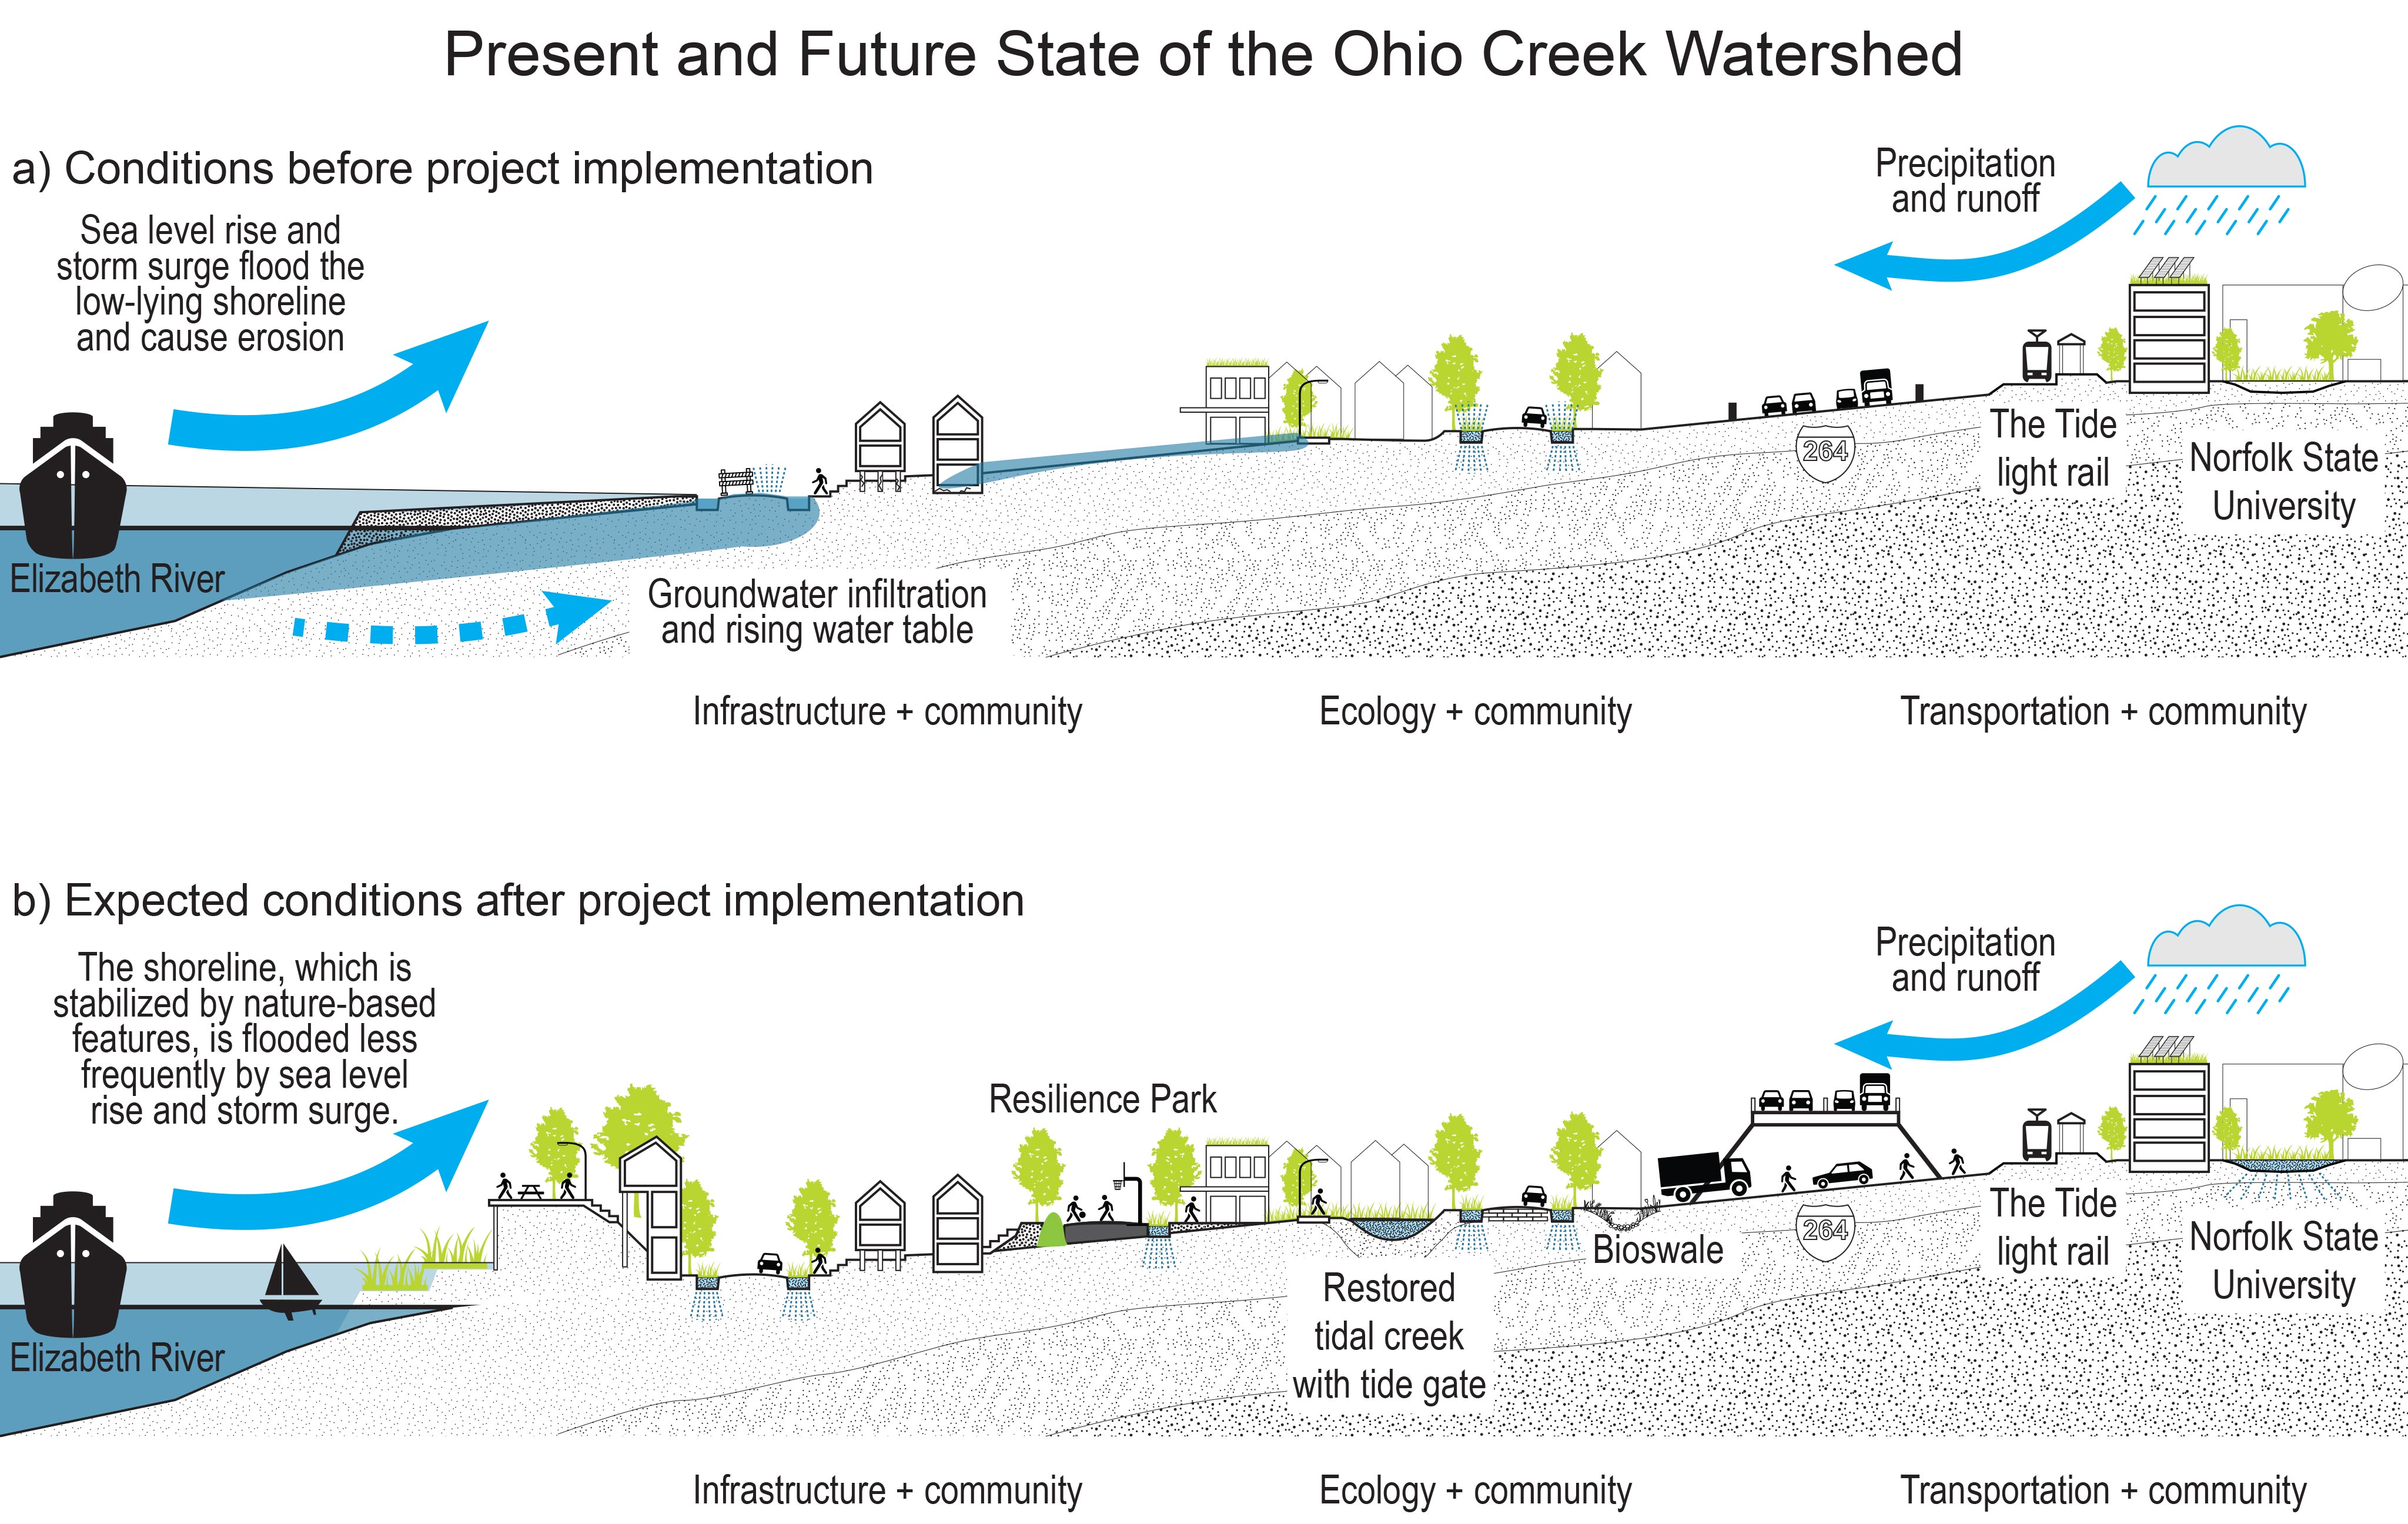 Present and Future State of the Ohio Creek Watershed